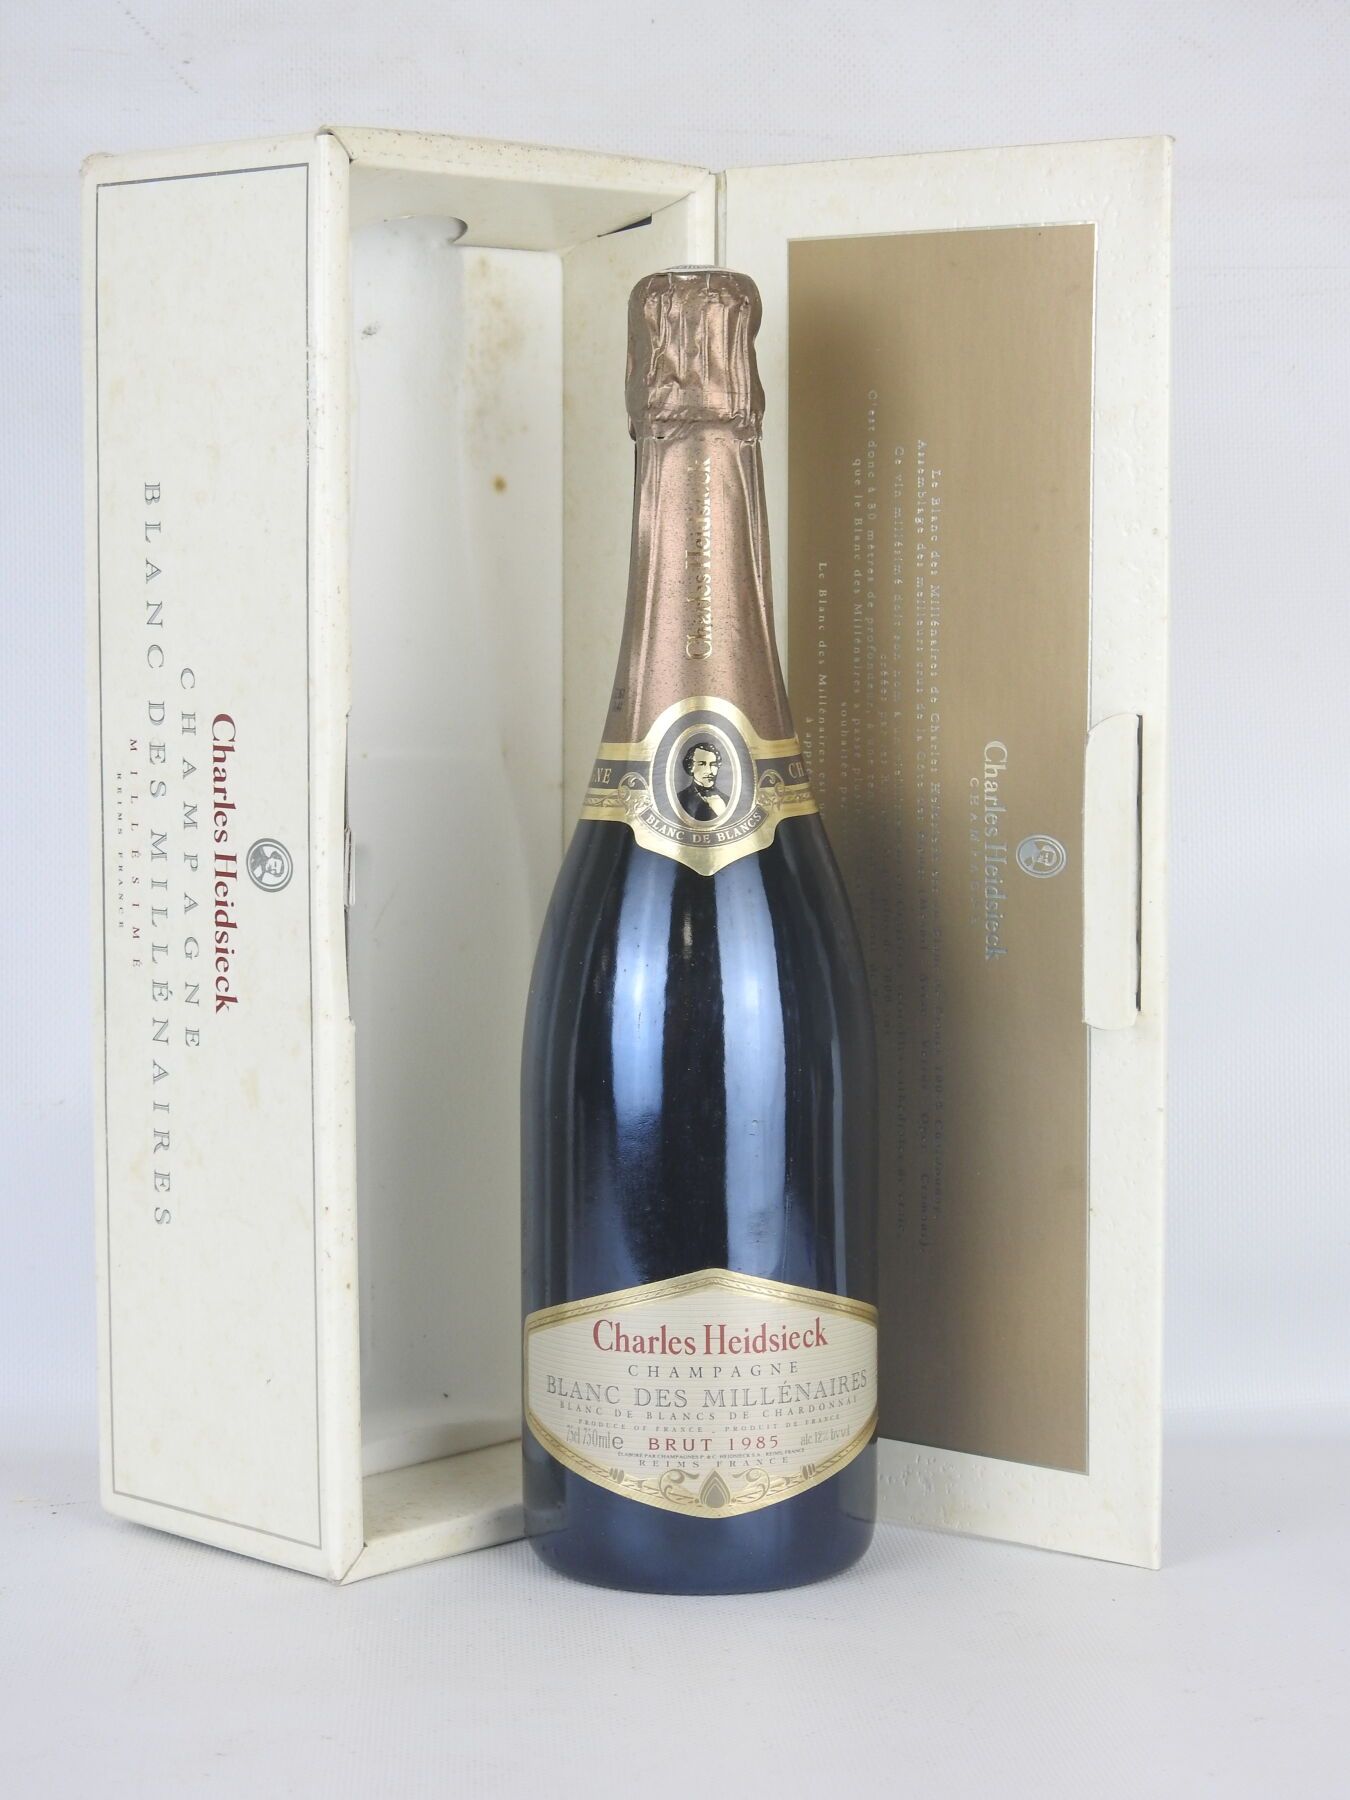 Null 1 bottle Champagne Charles Heidsieck cuvee du millenaire 1985. In a box